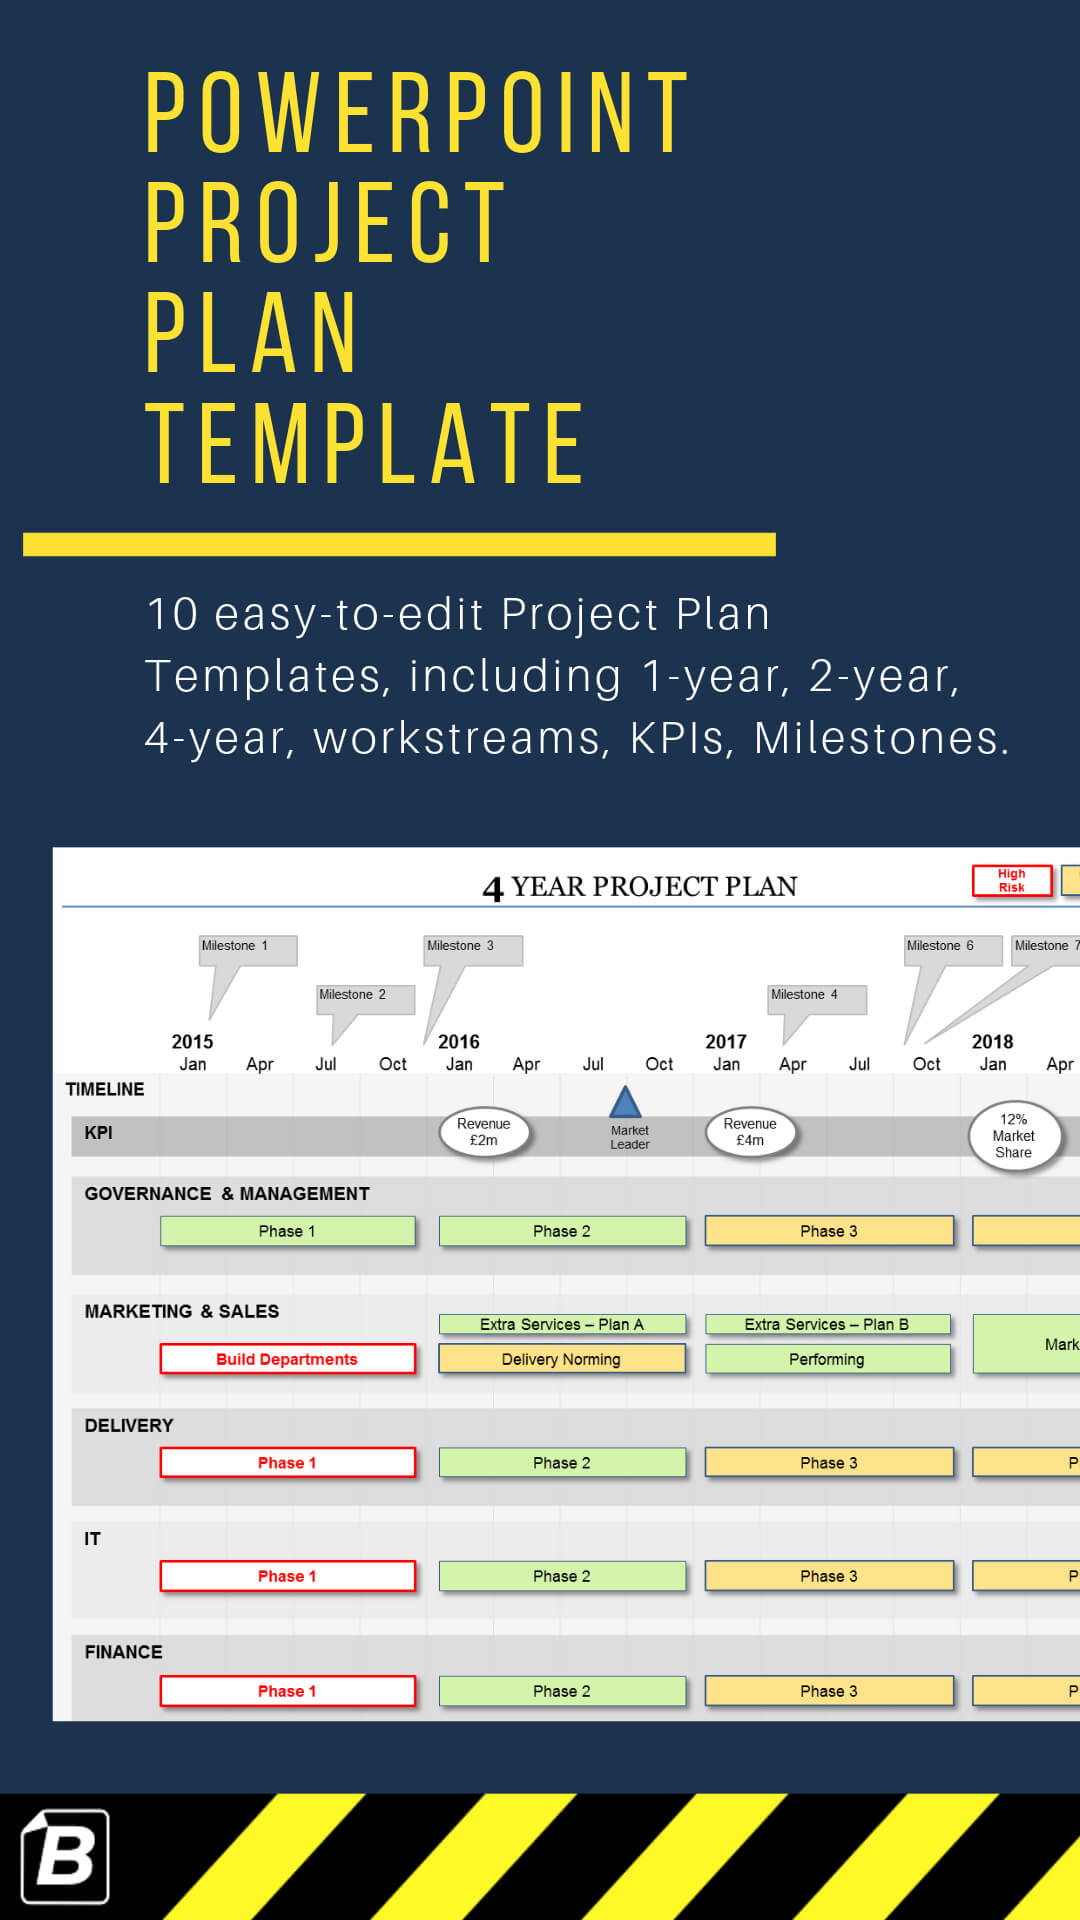 Powerpoint Project Plan Template | How To Plan, Projects Intended For Project Schedule Template Powerpoint